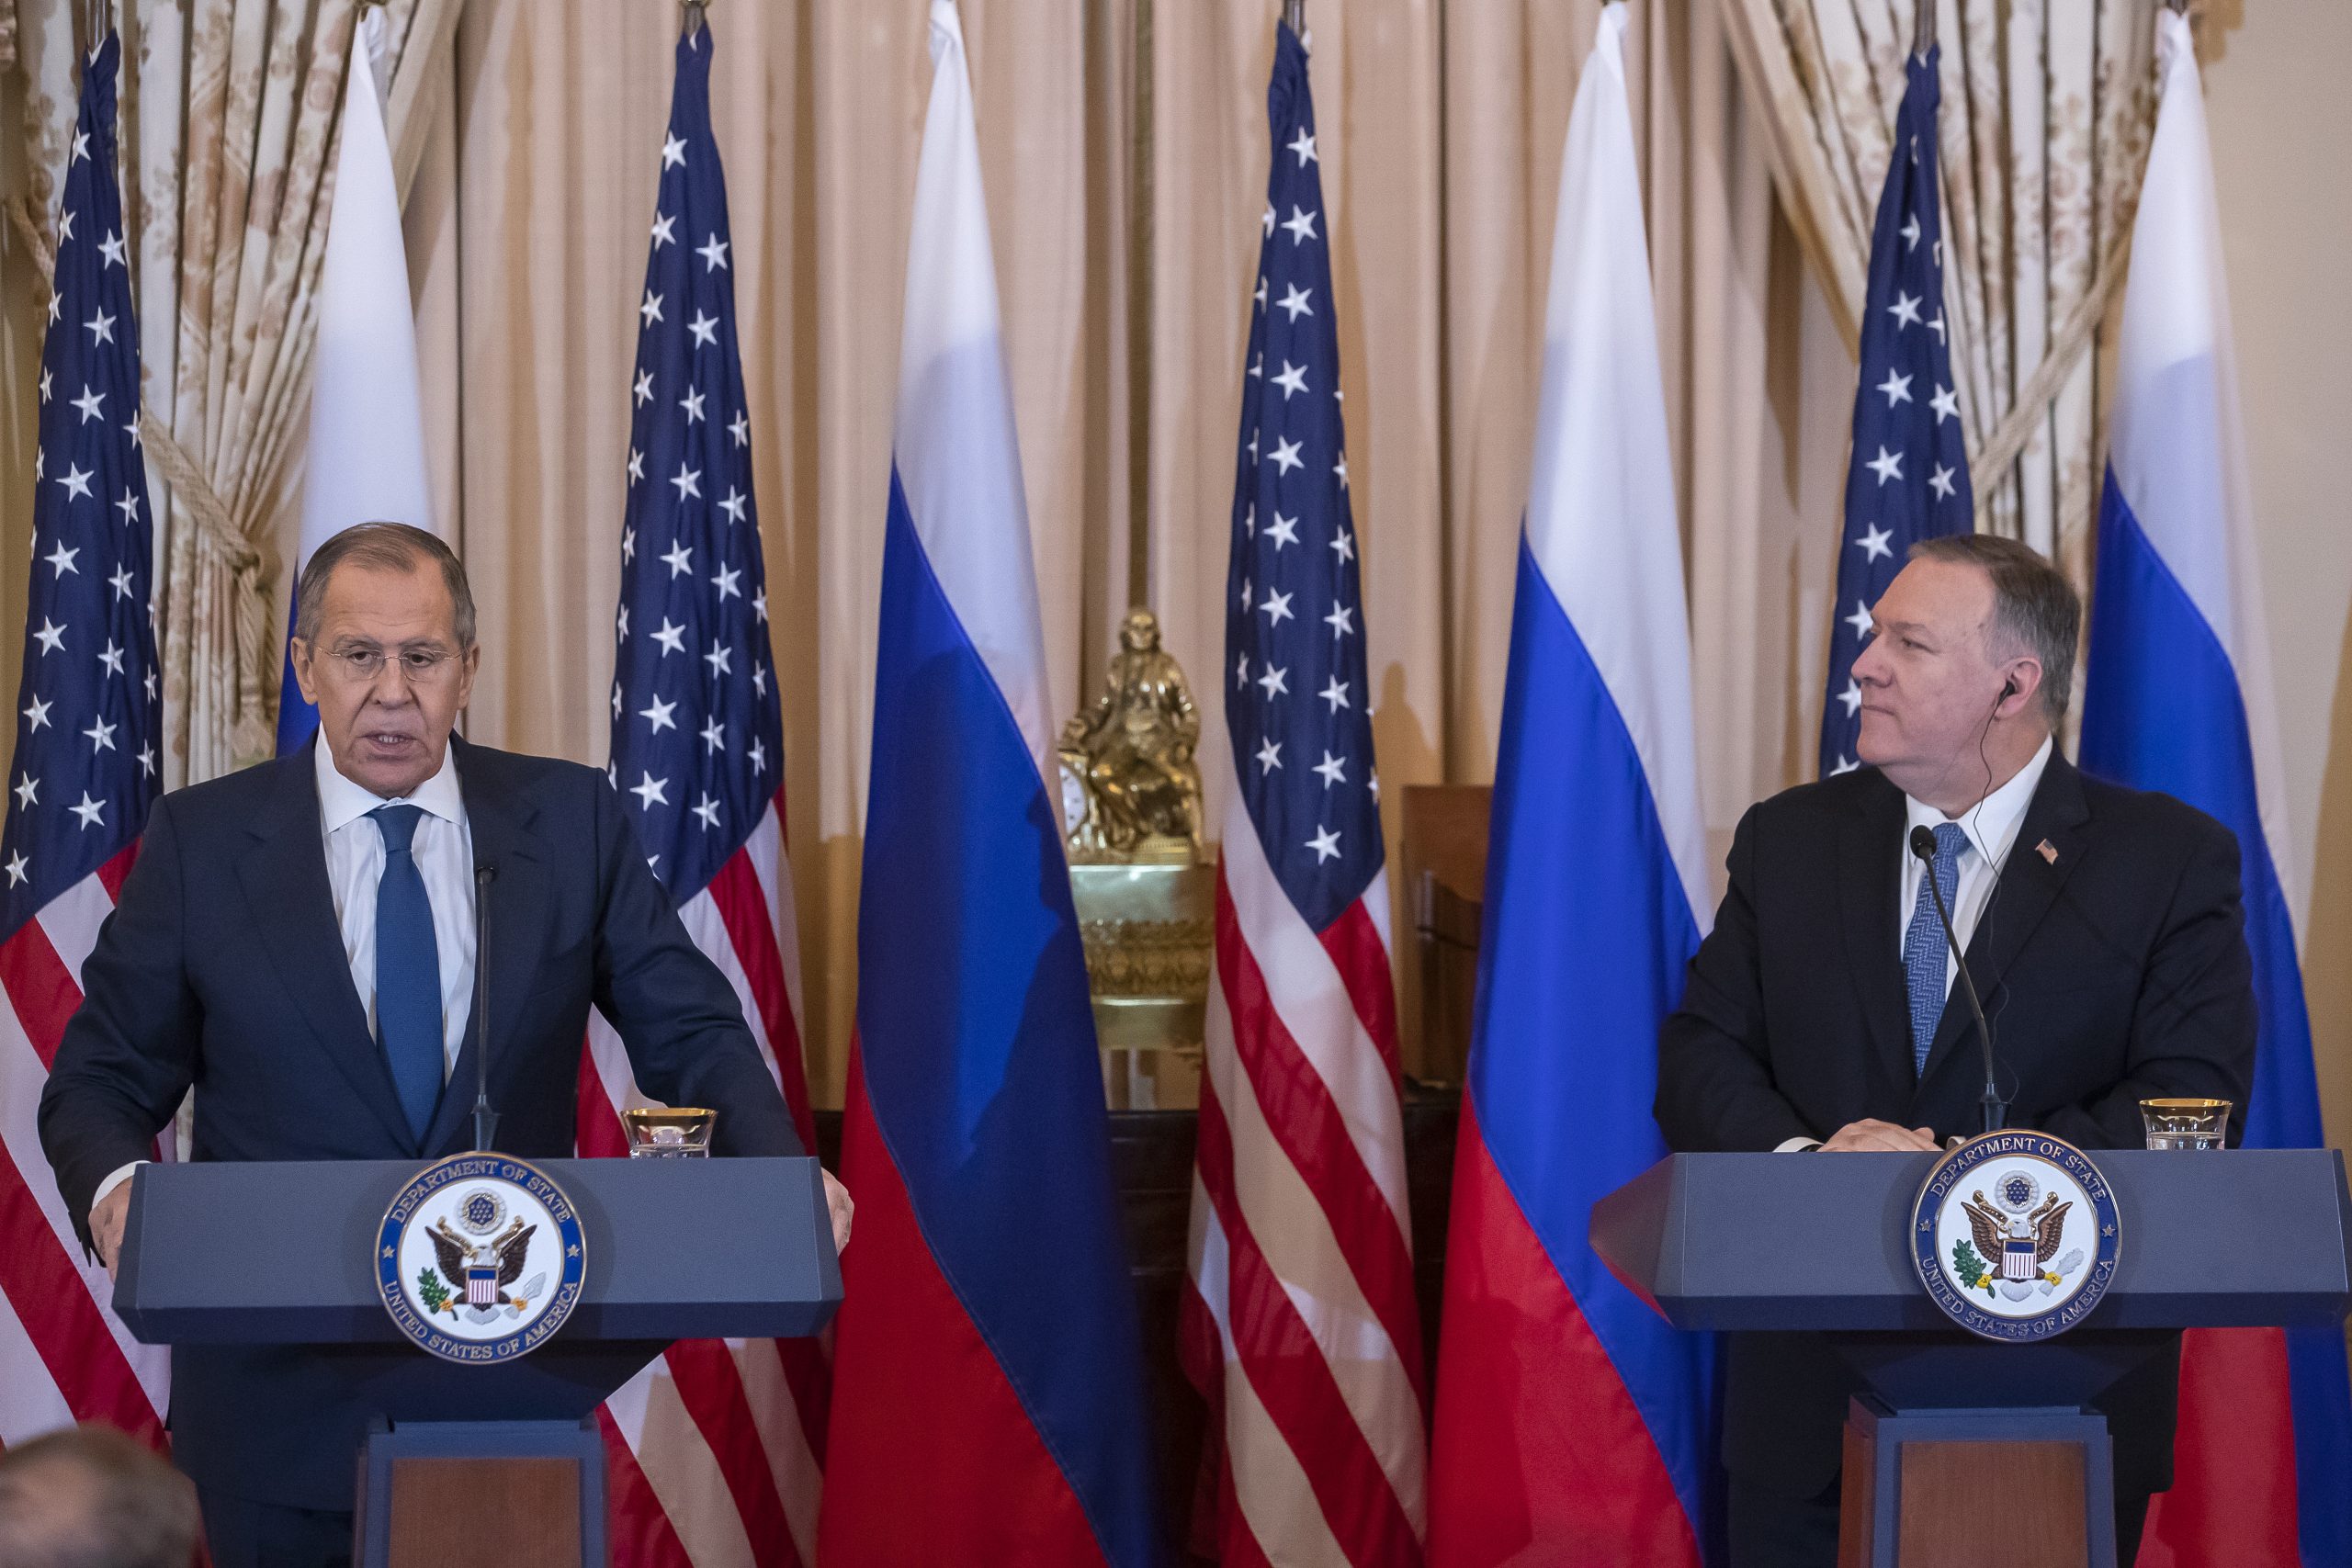 epa08060784 US Secretary of State Mike Pompeo (R) and Russian Foreign Minister Sergey Lavrov (L) participate in a press conference at the Department of State in Washington, DC, USA, 10 December 2019. Lavrov is scheduled to meet with US President Donald J. Trump at the White House later in the day.  EPA/ERIK S. LESSER